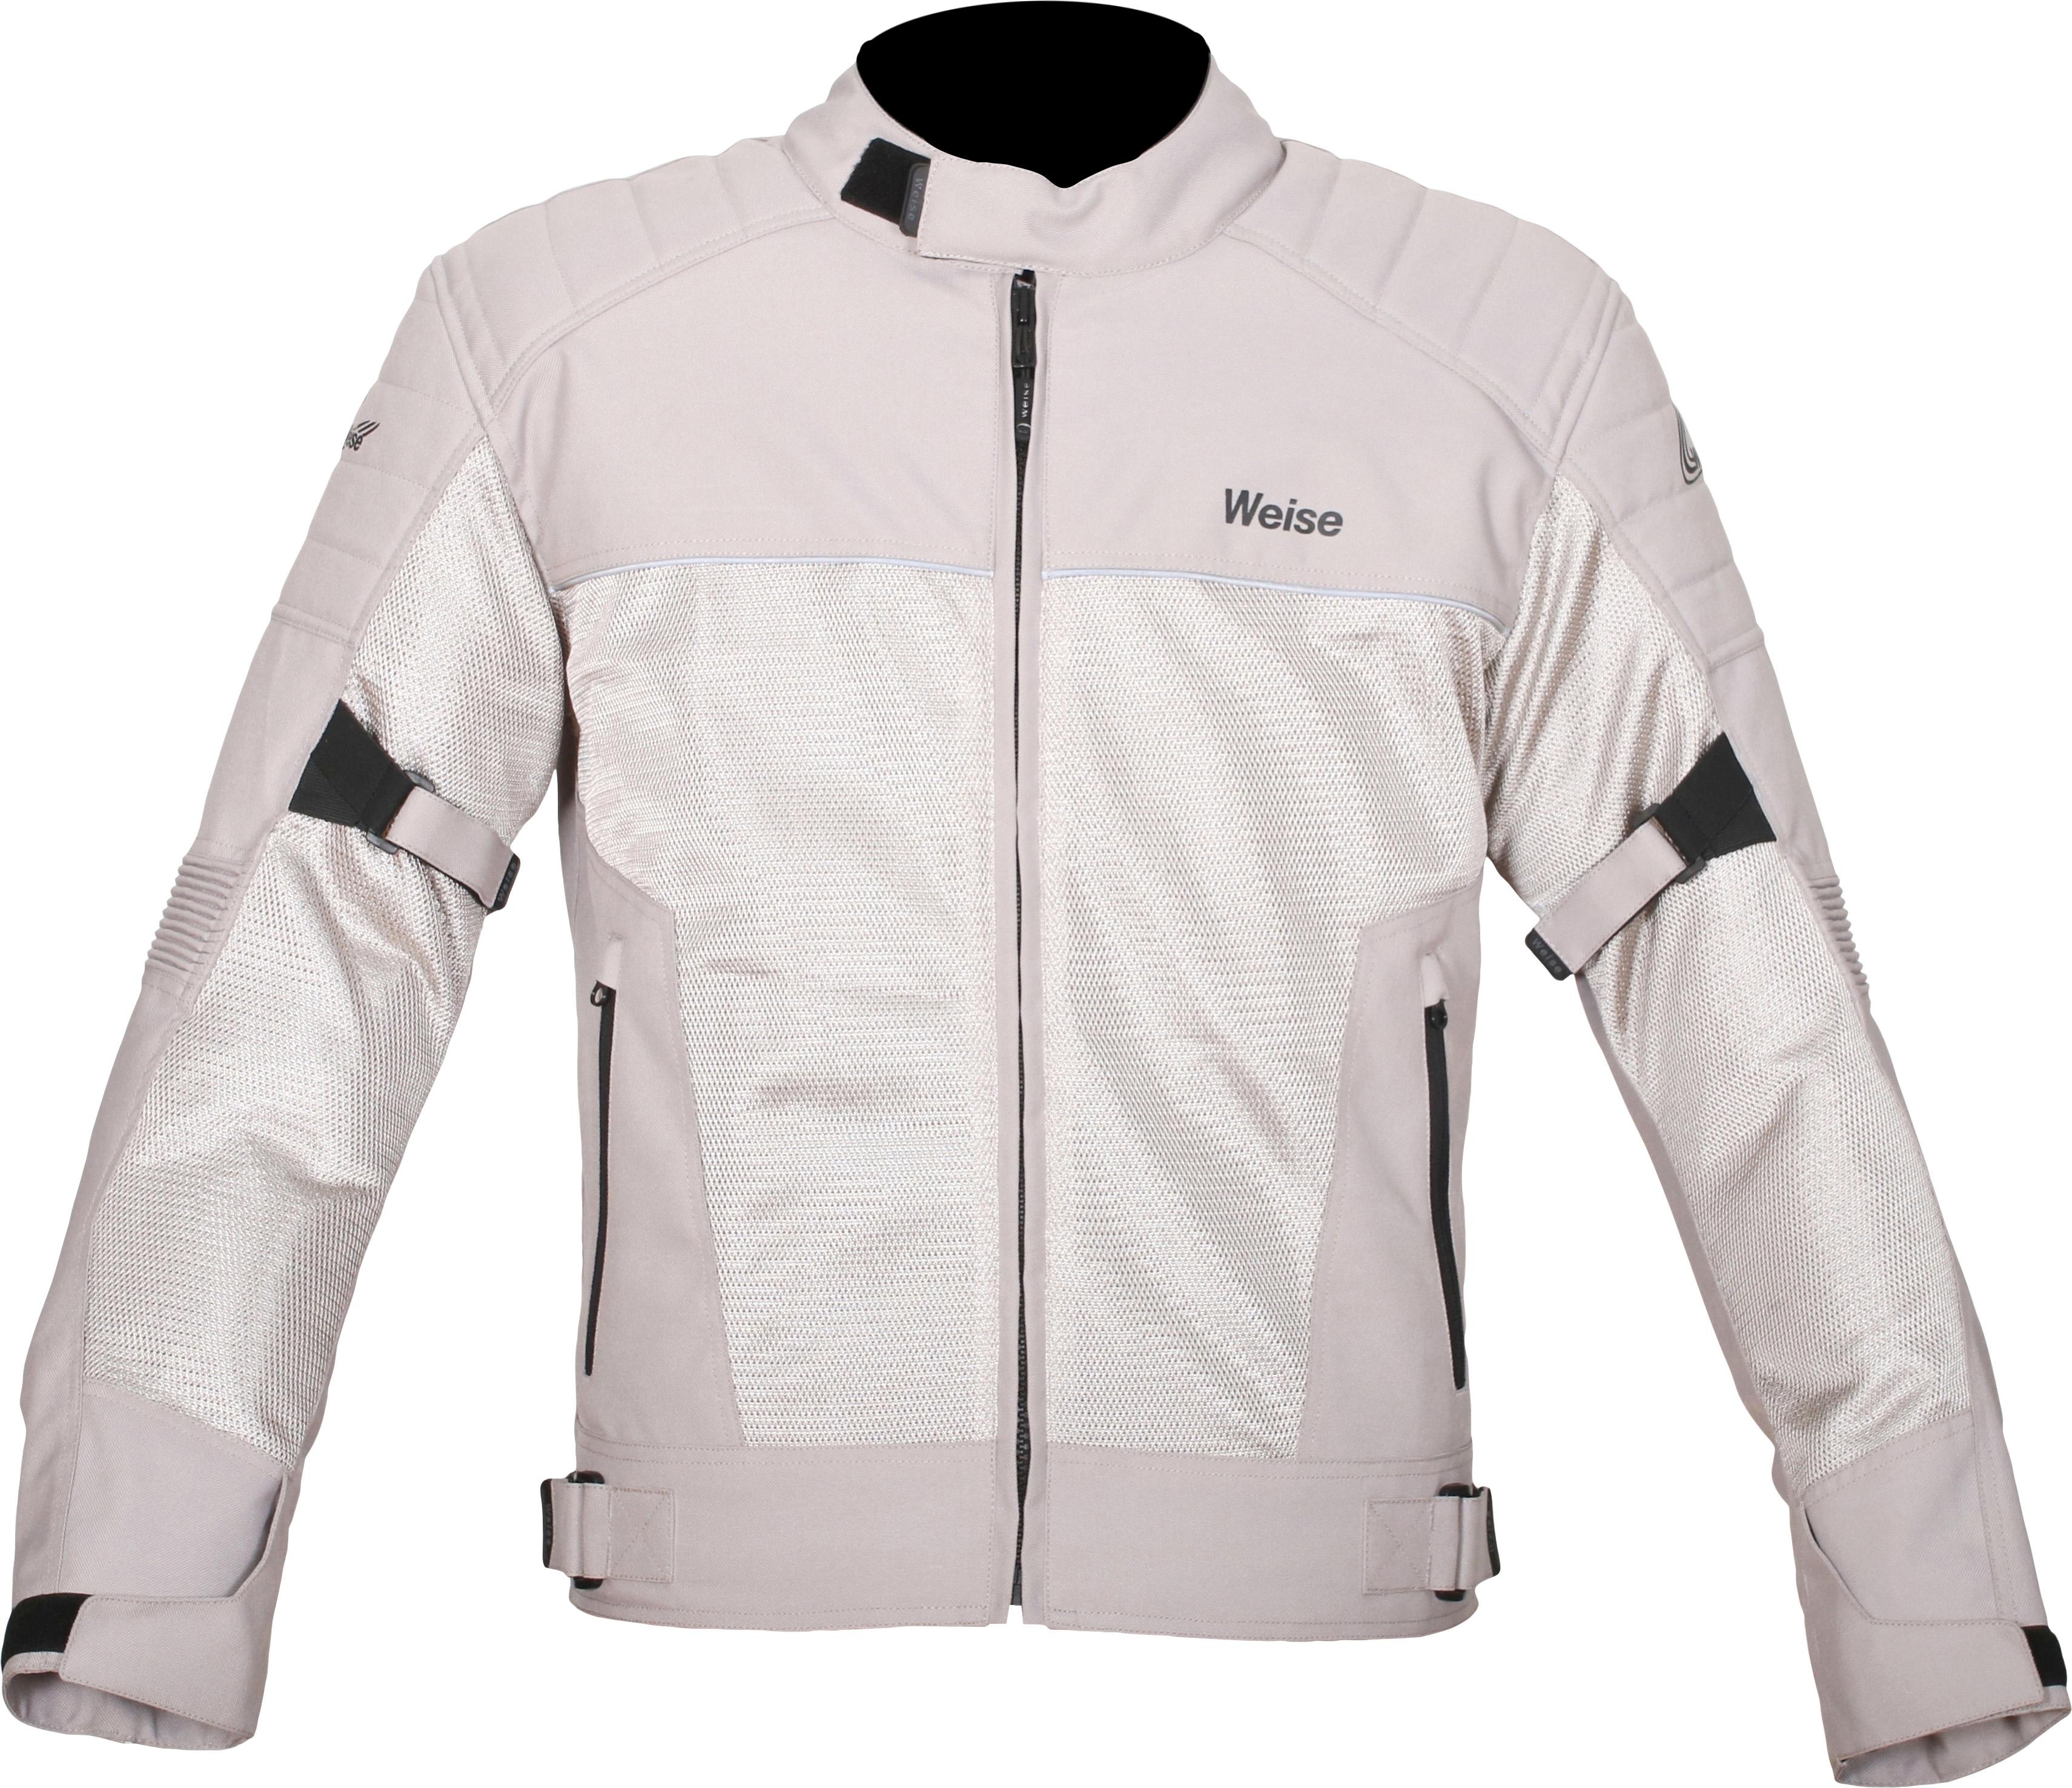 Weise Scout Motorcycle Jacket - Stone, S